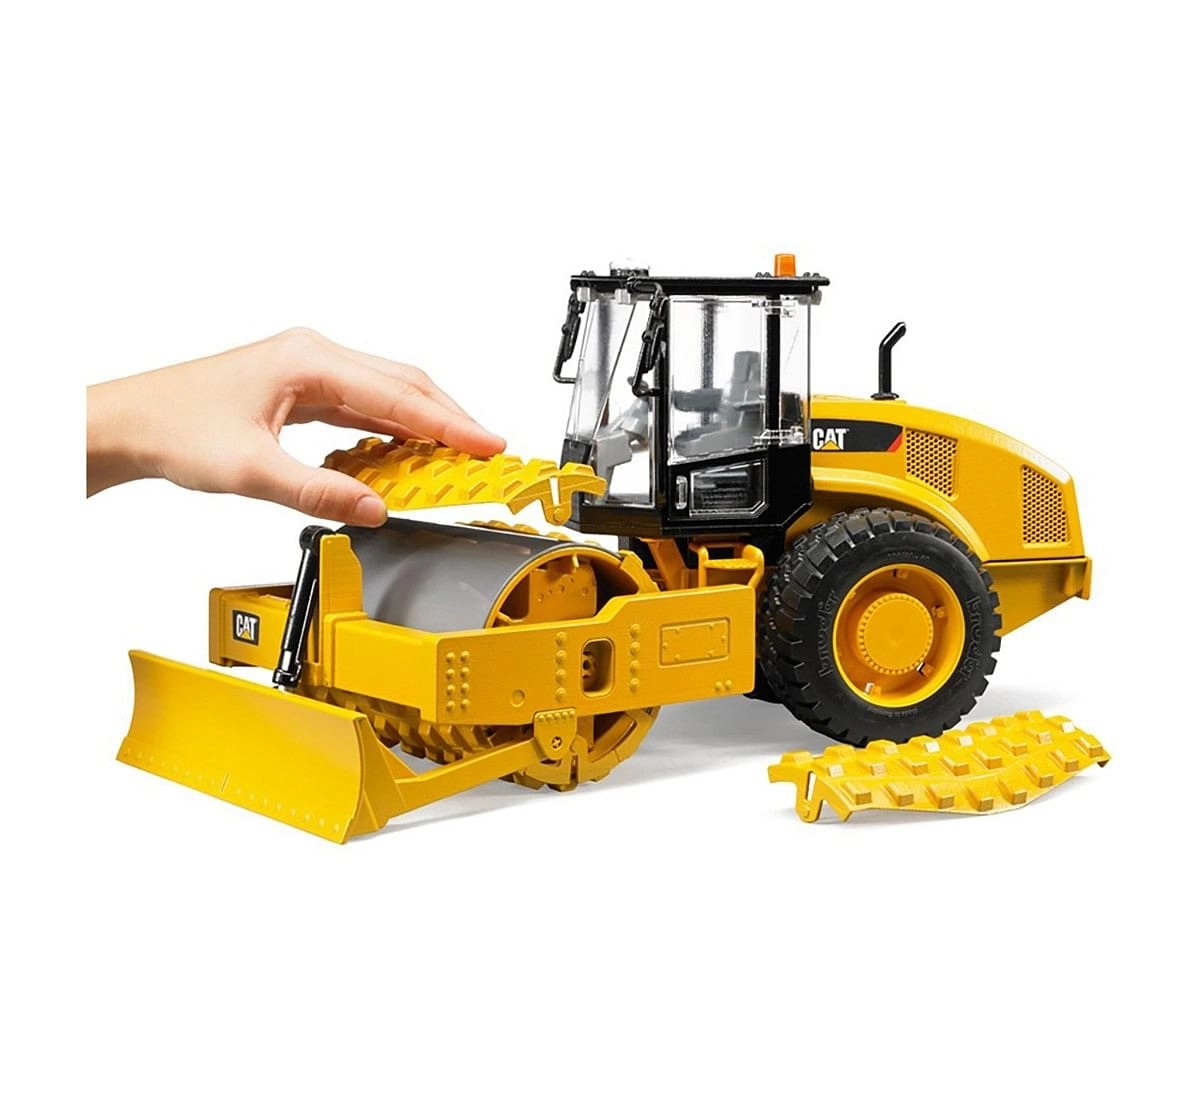 CAT Bruder 1:16 Caterpillar Vibratory Soil Compactor with Levelling Blade Vehicles for Kids age 4Y+ (Yellow)